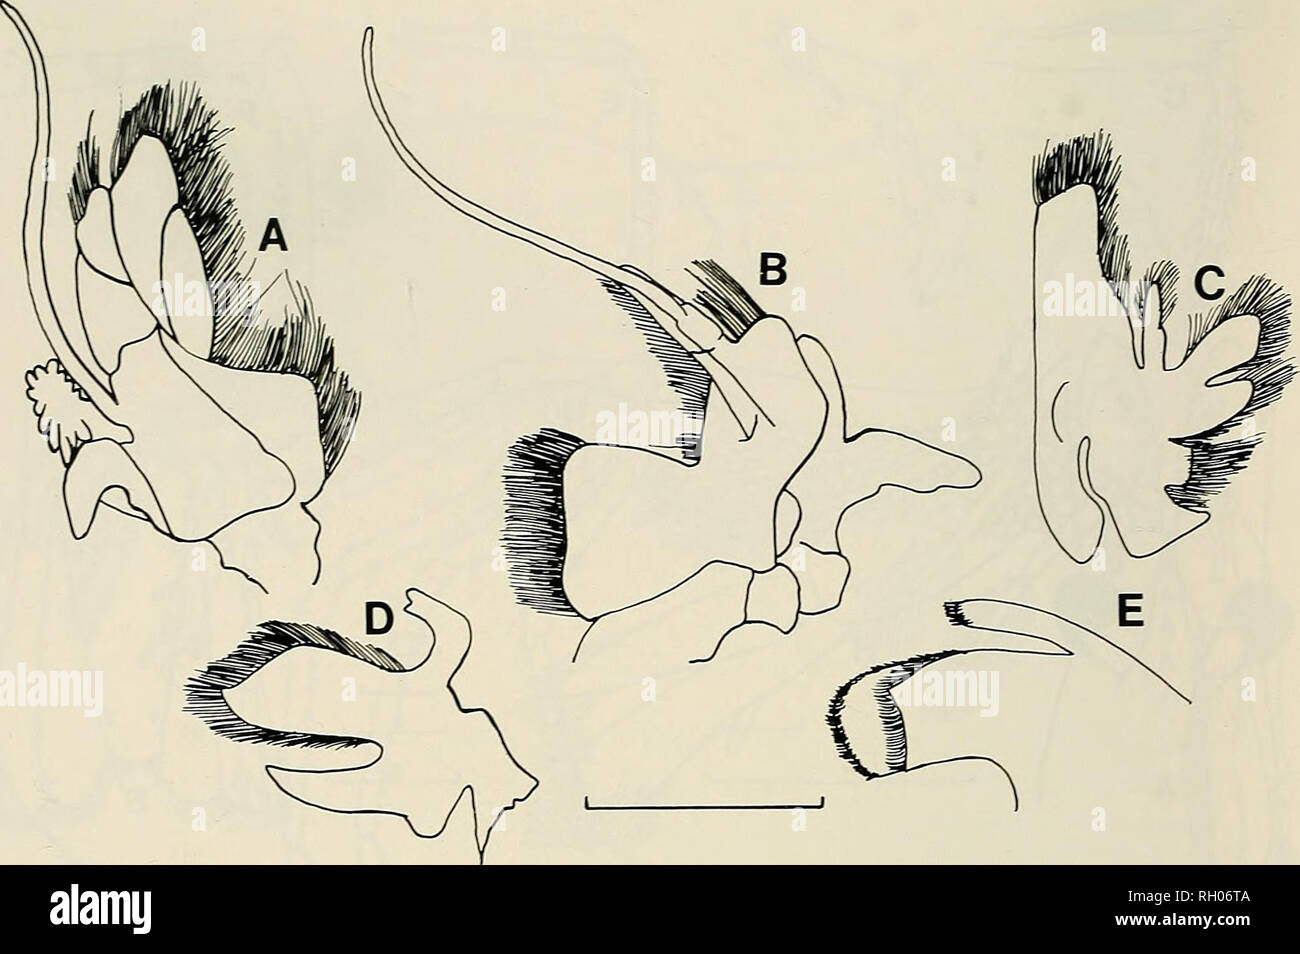 . Bulletin. Science; Natural history; Natural history. 30 SOUTHERN CALIFORNIA ACADEMY OF SCIENCES. Fig. 3. Thor algicola n. sp. A, second maxilliped; B, first maxilliped; C, second maxiUa; D, first maxilla; E, mandible. Female with appendix interna on second pleopod. Male with first pleopod smaller than other pleopods. Male second pleopod with setose appendix mas- culina. Uropods longer than telson, fringed with setae. Outer branch of uropod with small distolateral tooth and movable spine. Holotype.—¥QV!2it, ovigerous, total length in millimeters 18.4, carapace length 5.1. Bahia Bocochibampo Stock Photo